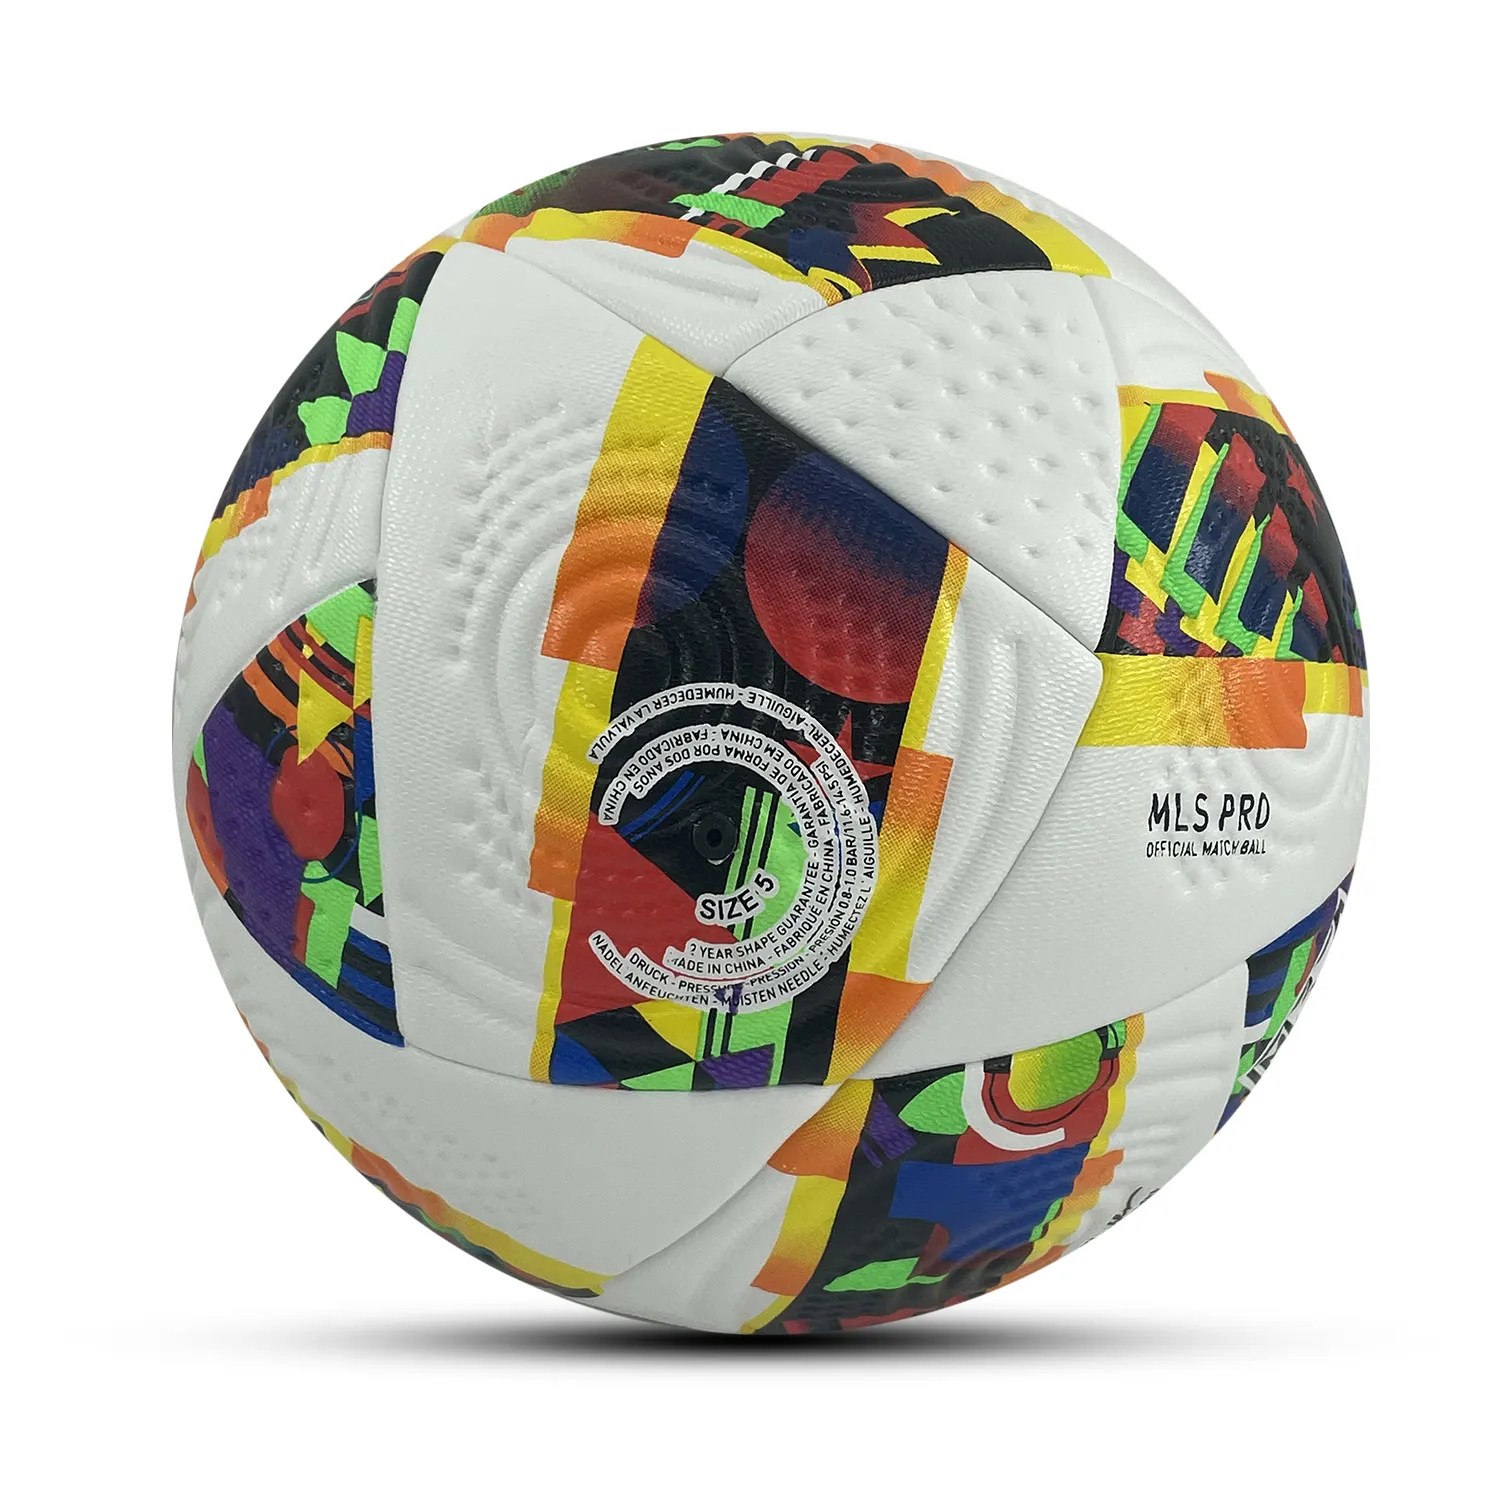 PU low elastic game special soccer ball students seamless hot fit size 4 5 youth training standard soccer ball football ball